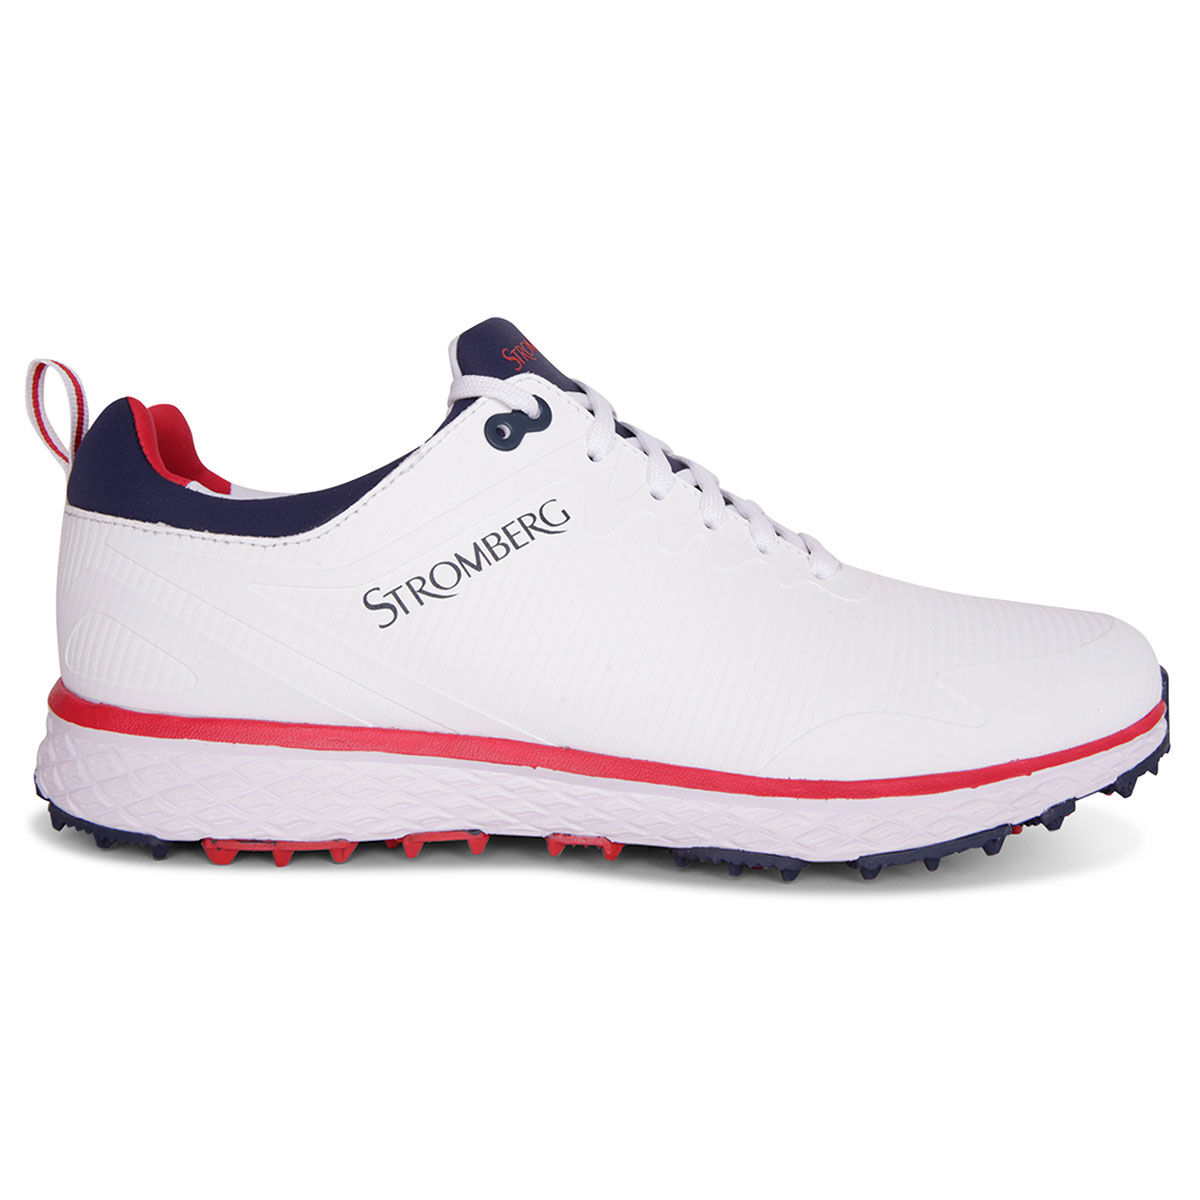 Stromberg Men’s Tempo Waterproof Spikeless Golf Shoes, Mens, White/red/navy, 7 | American Golf